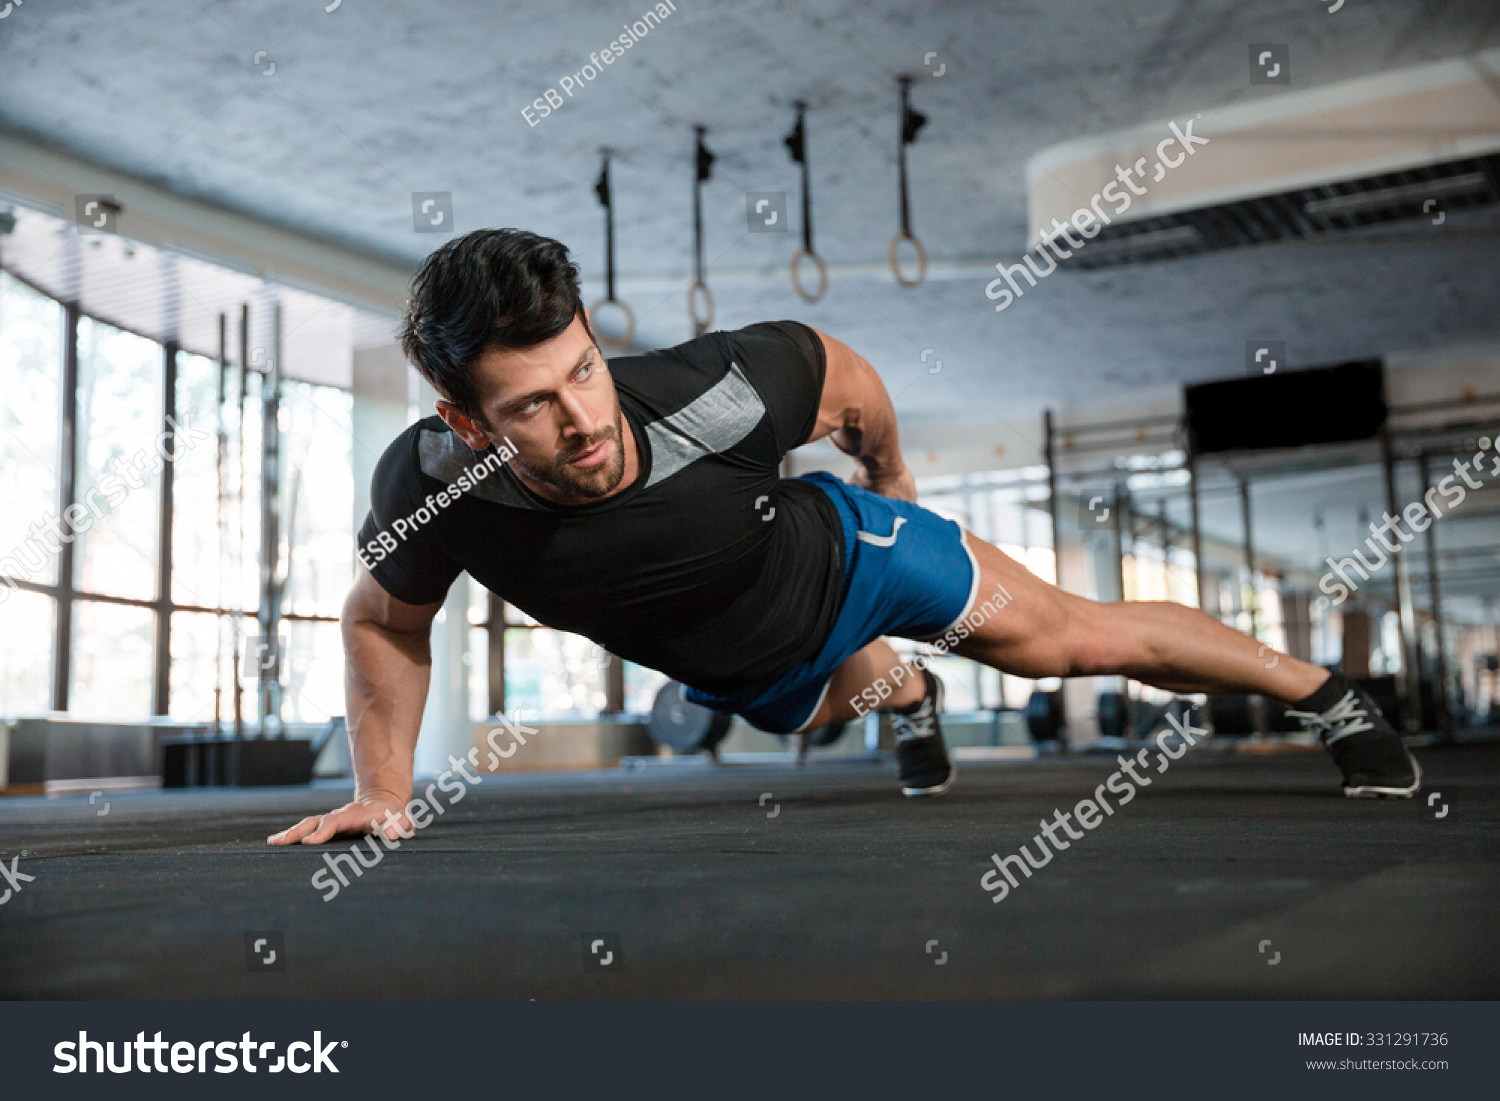 Portrait of a handsome man doing push ups exercise with one hand in fitness gym #331291736